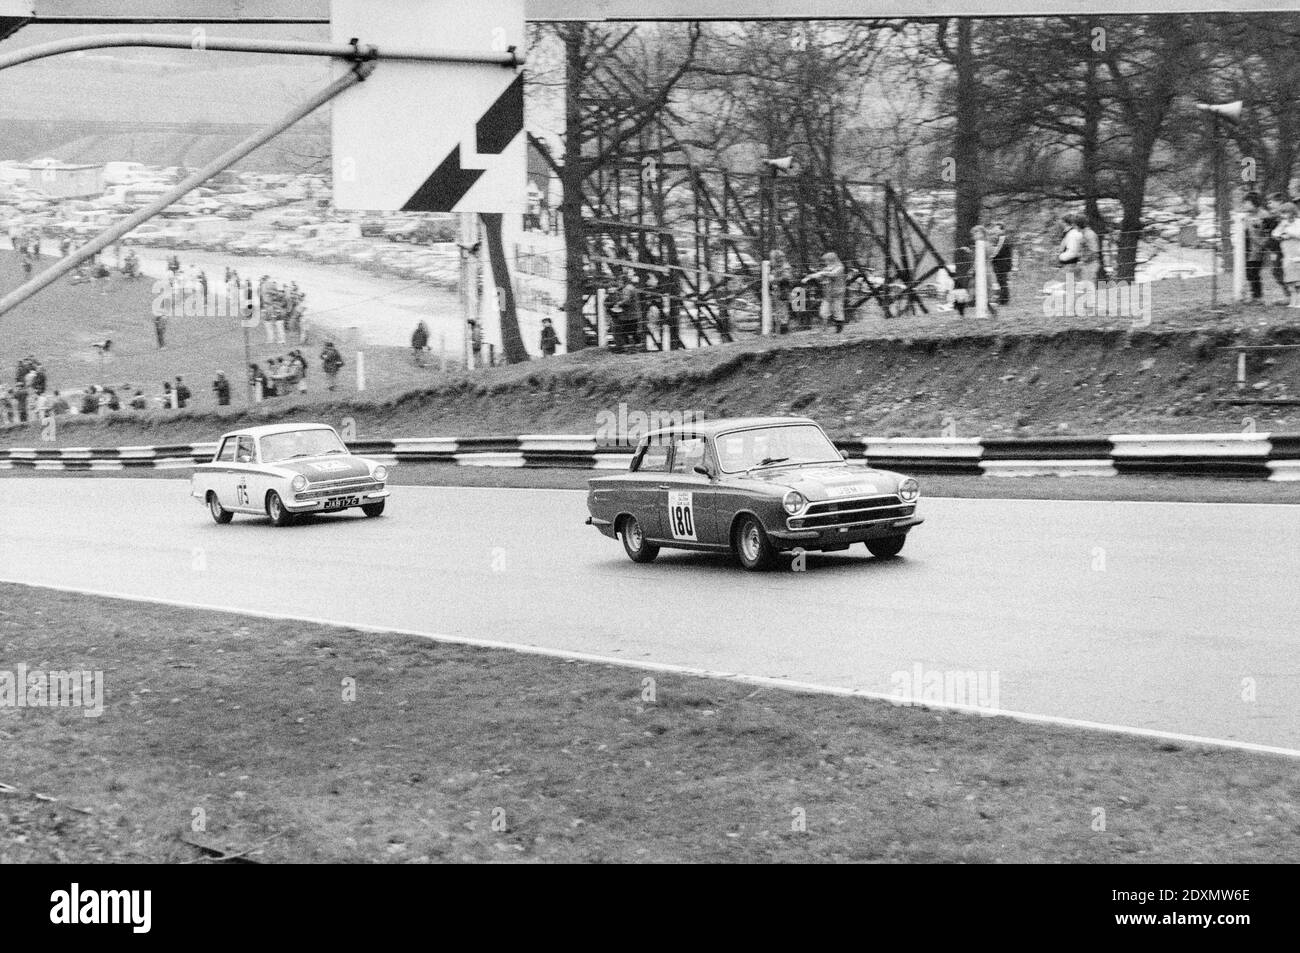 Vintage black and white photograph taken in 1983 showing Lotus Corvinas UBM 1, race number 180, and JAB 17C, race number 175,  racing at the Brands Hatch circuit inn England. Stock Photo